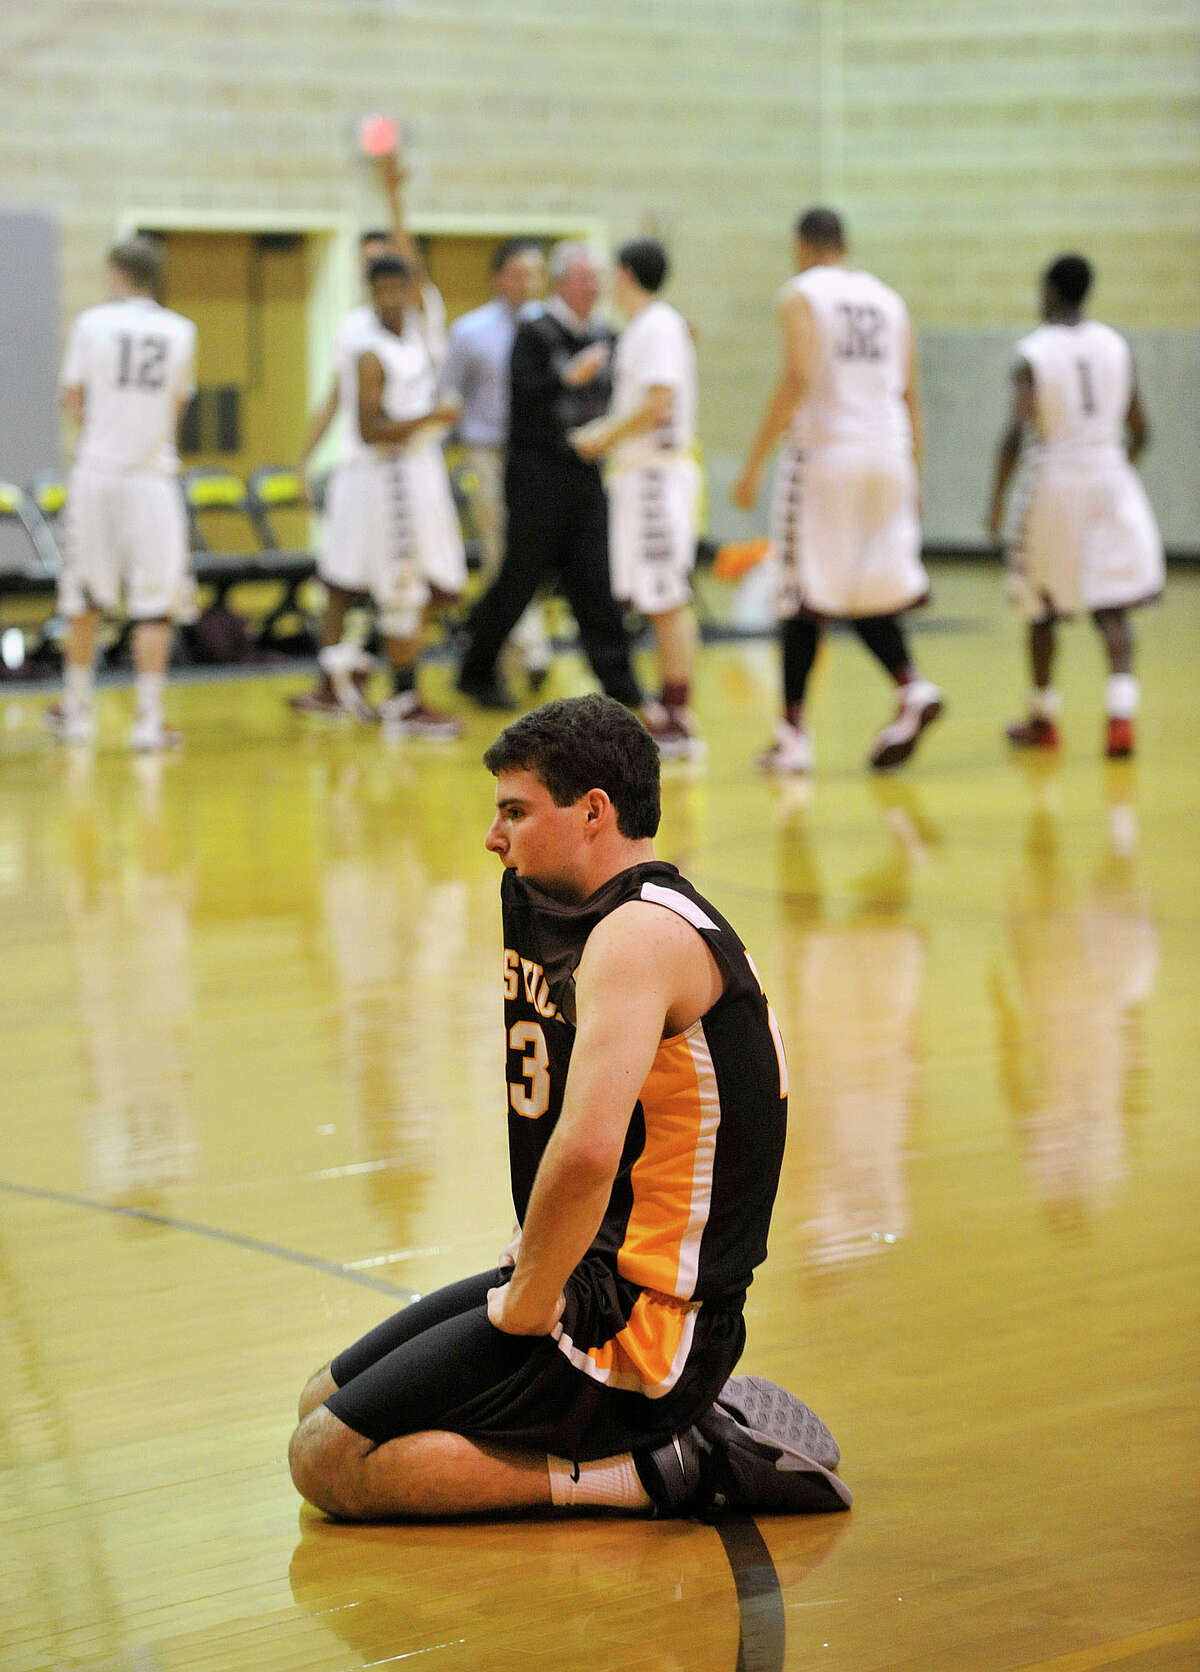 Brunswick's Billy O'Malley reacts after losing to Hopkins, 60-58, in the final seconds of their basketball game at Brunswick School's Simpson Athletic Center in Greenwich, Conn., on Monday, Jan. 13, 2014.